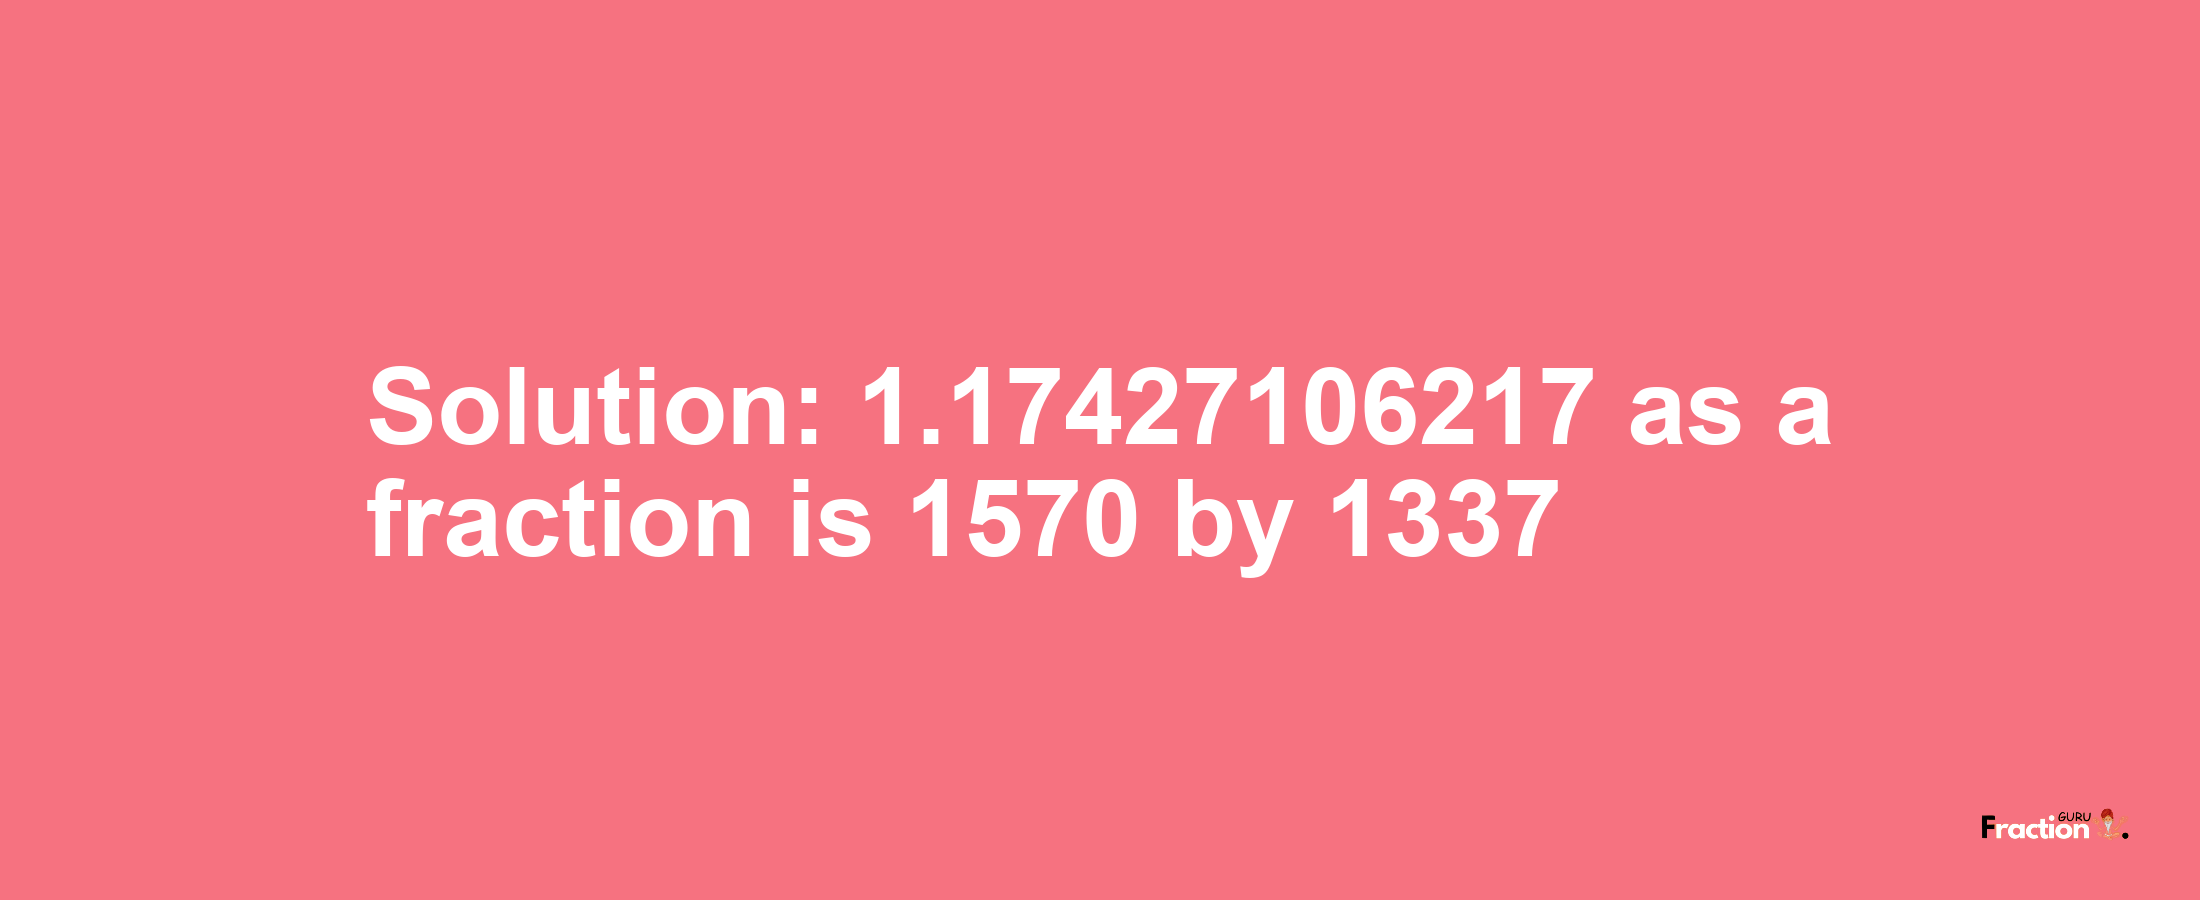 Solution:1.17427106217 as a fraction is 1570/1337